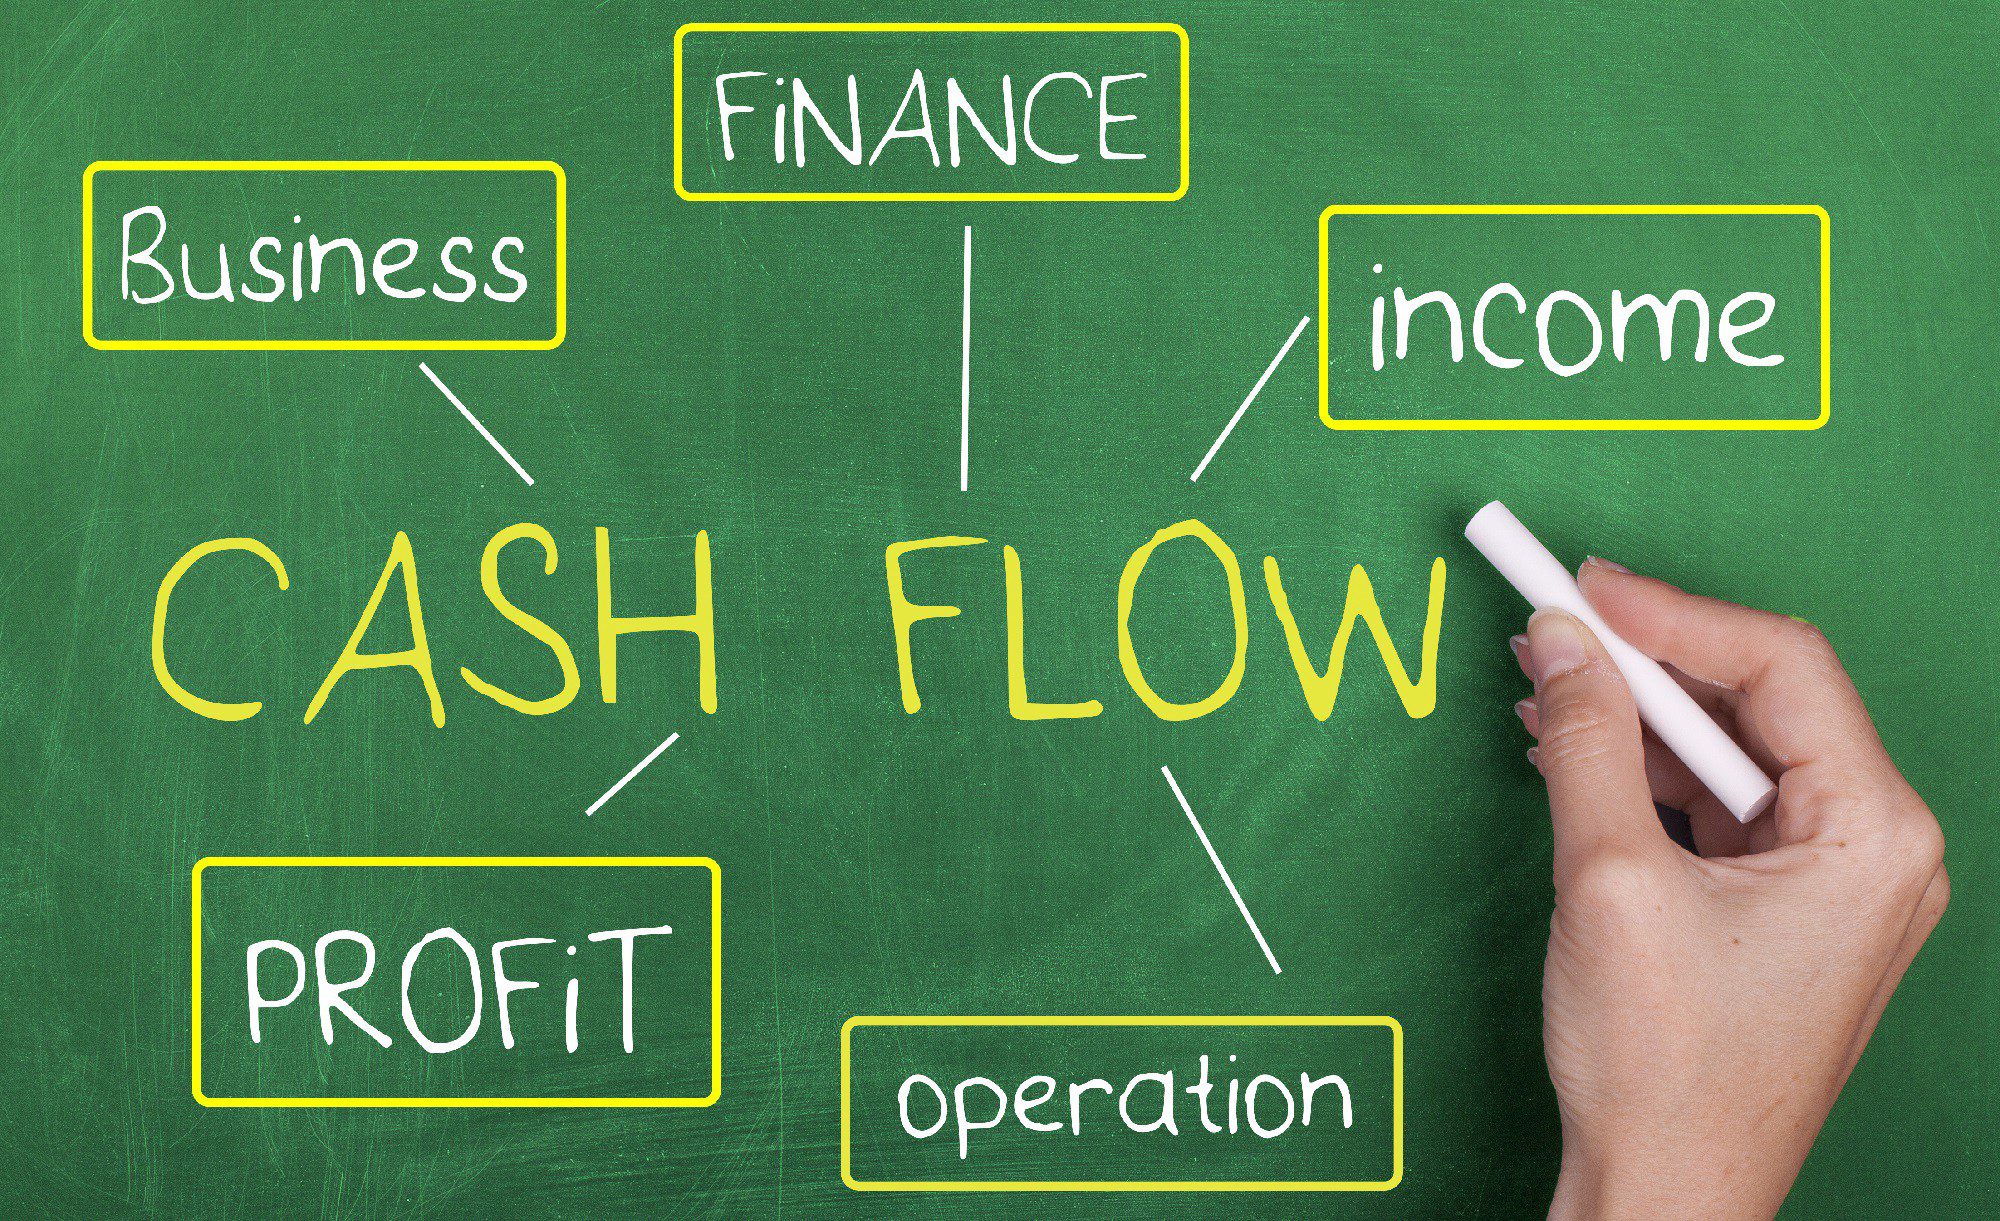 Cash flow can be mitigated with finance solutions, lines of credit, & non-financing improvement of management systems. Rolf Neuweiler, A2ZCFO (image:chalkboard)